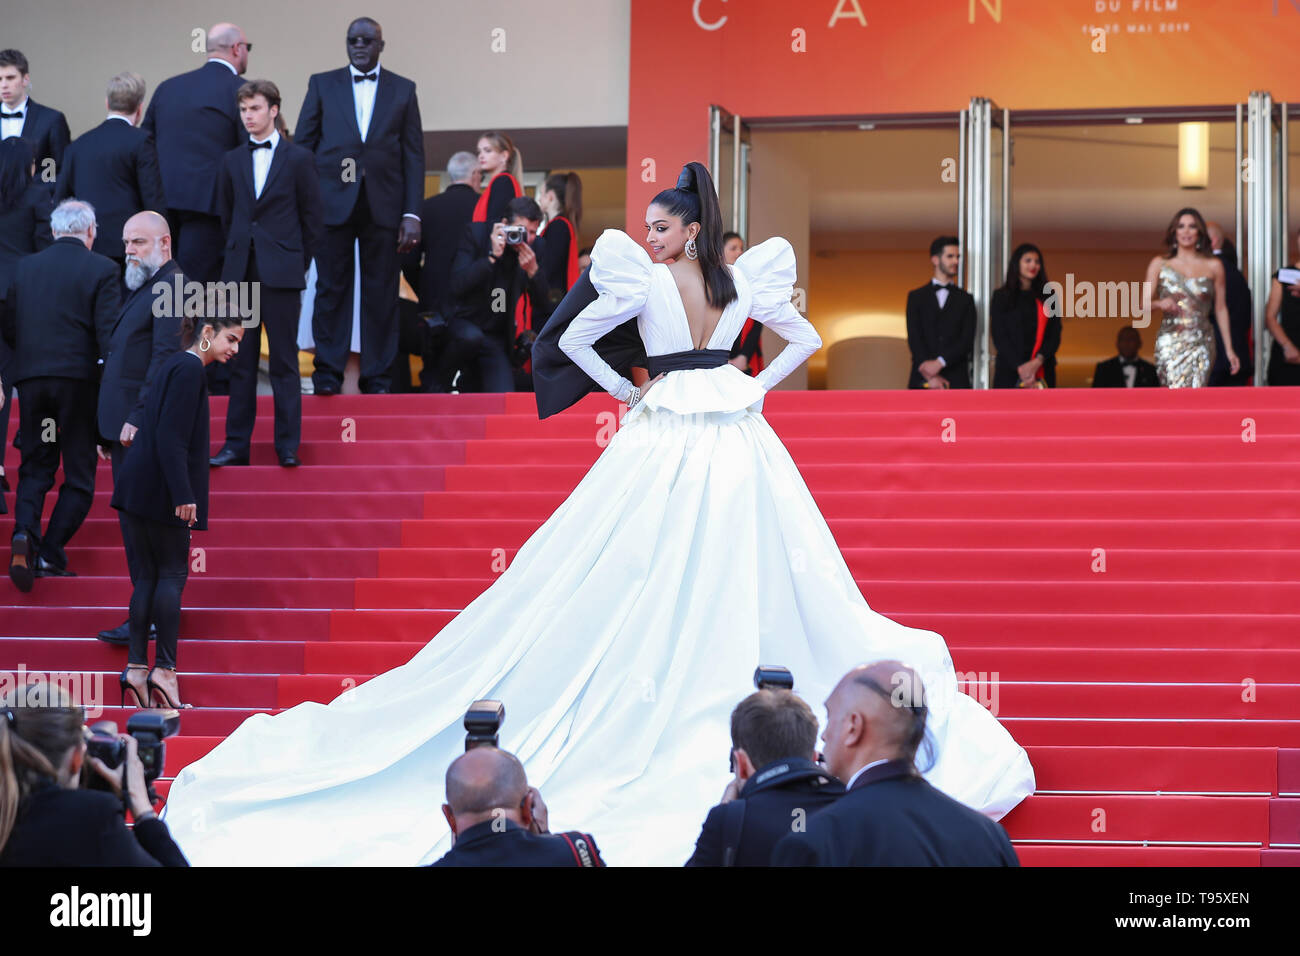 Cannes, France. 16th May, 2019. Actress Deepika Padukone poses on the red carpet for the premiere of the film 'Rocketman' at the 72nd Cannes Film Festival in Cannes, France, on May 16, 2019. The 72nd Cannes Film Festival is held here from May 14 to 25. Credit: Zhang Cheng/Xinhua/Alamy Live News Stock Photo